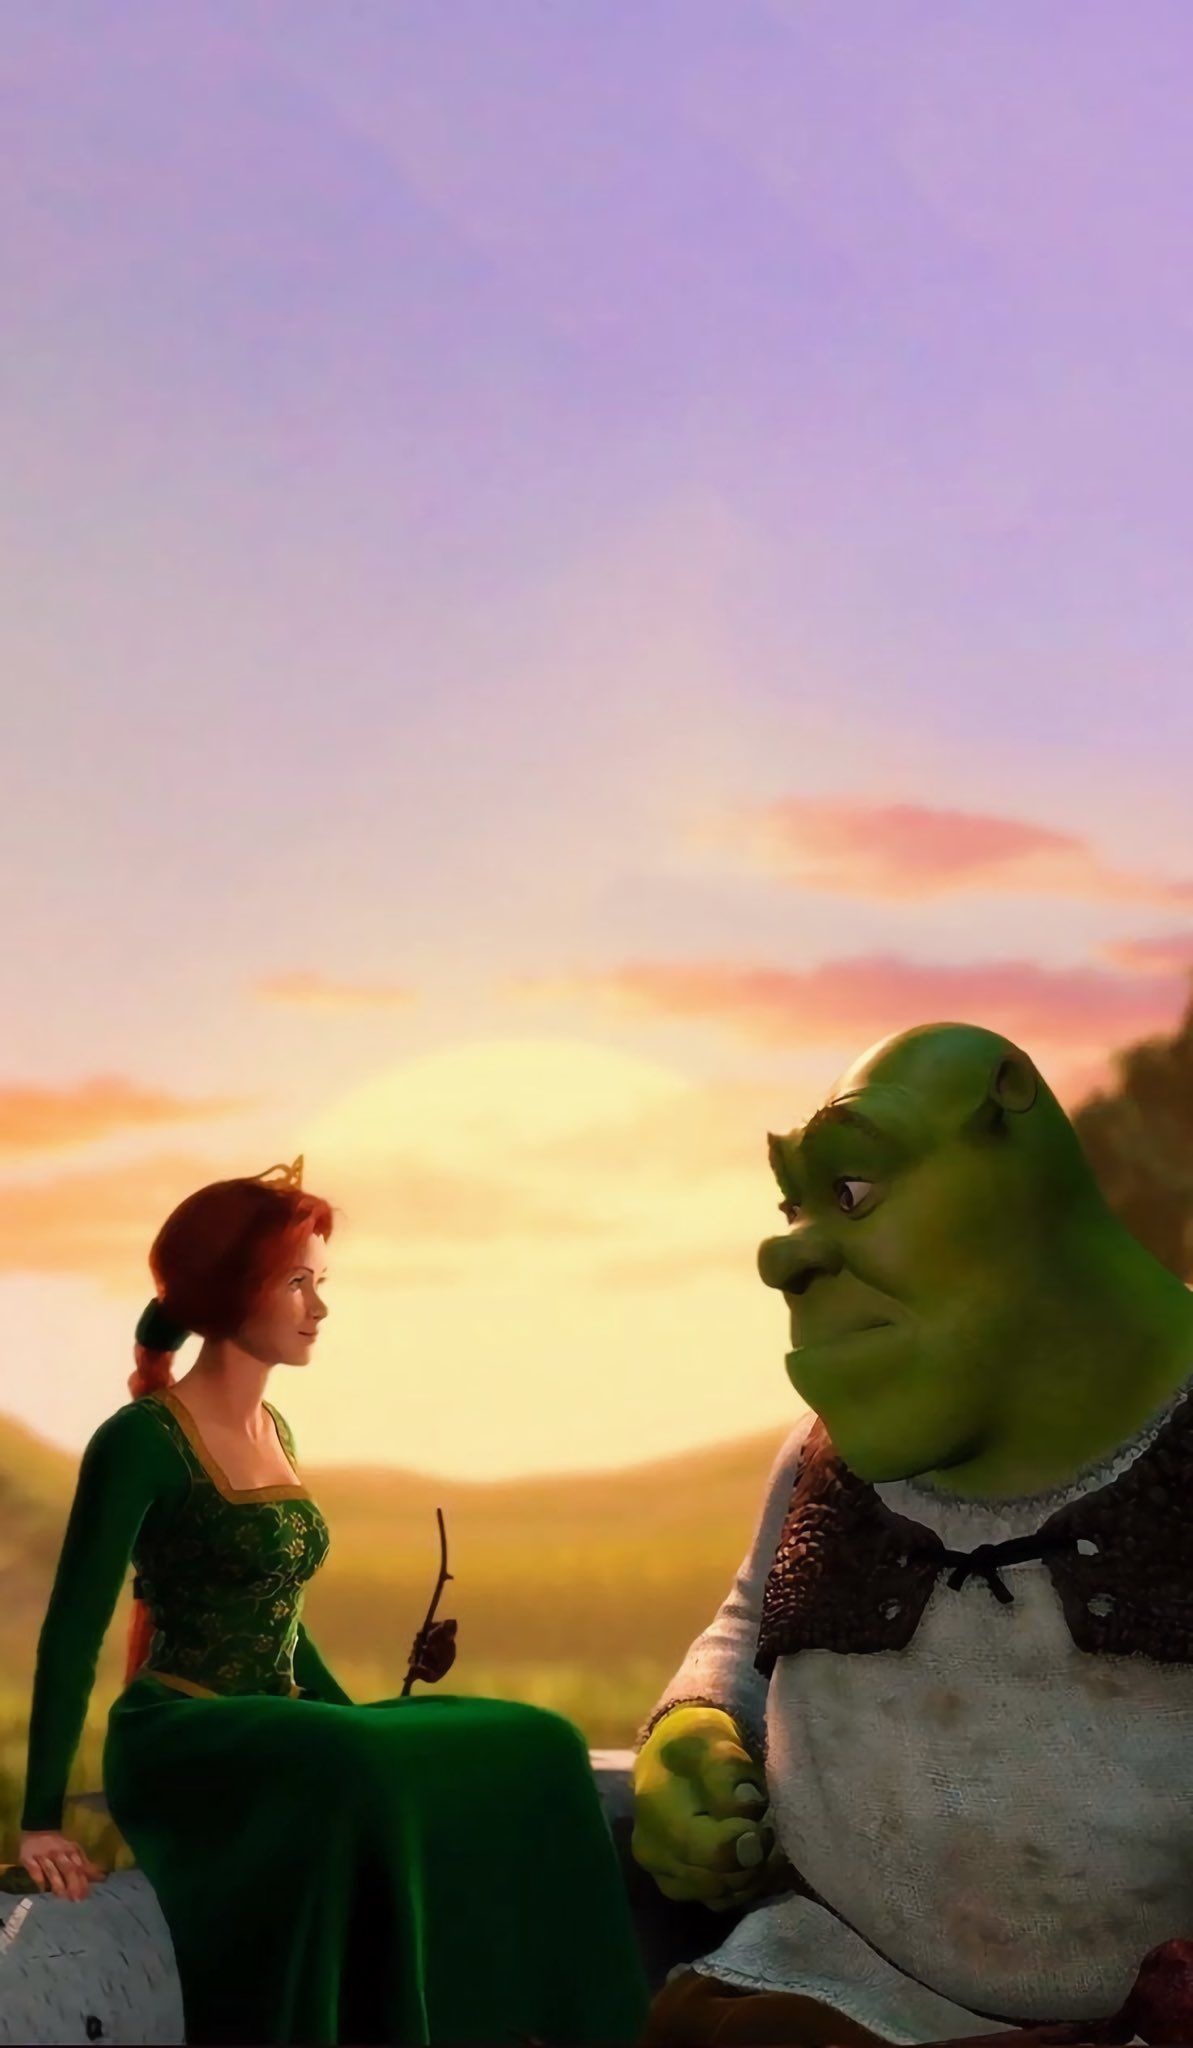 Shrek and Fiona, Animated pair, Love in motion, Film fairy tale, 1200x2050 HD Handy